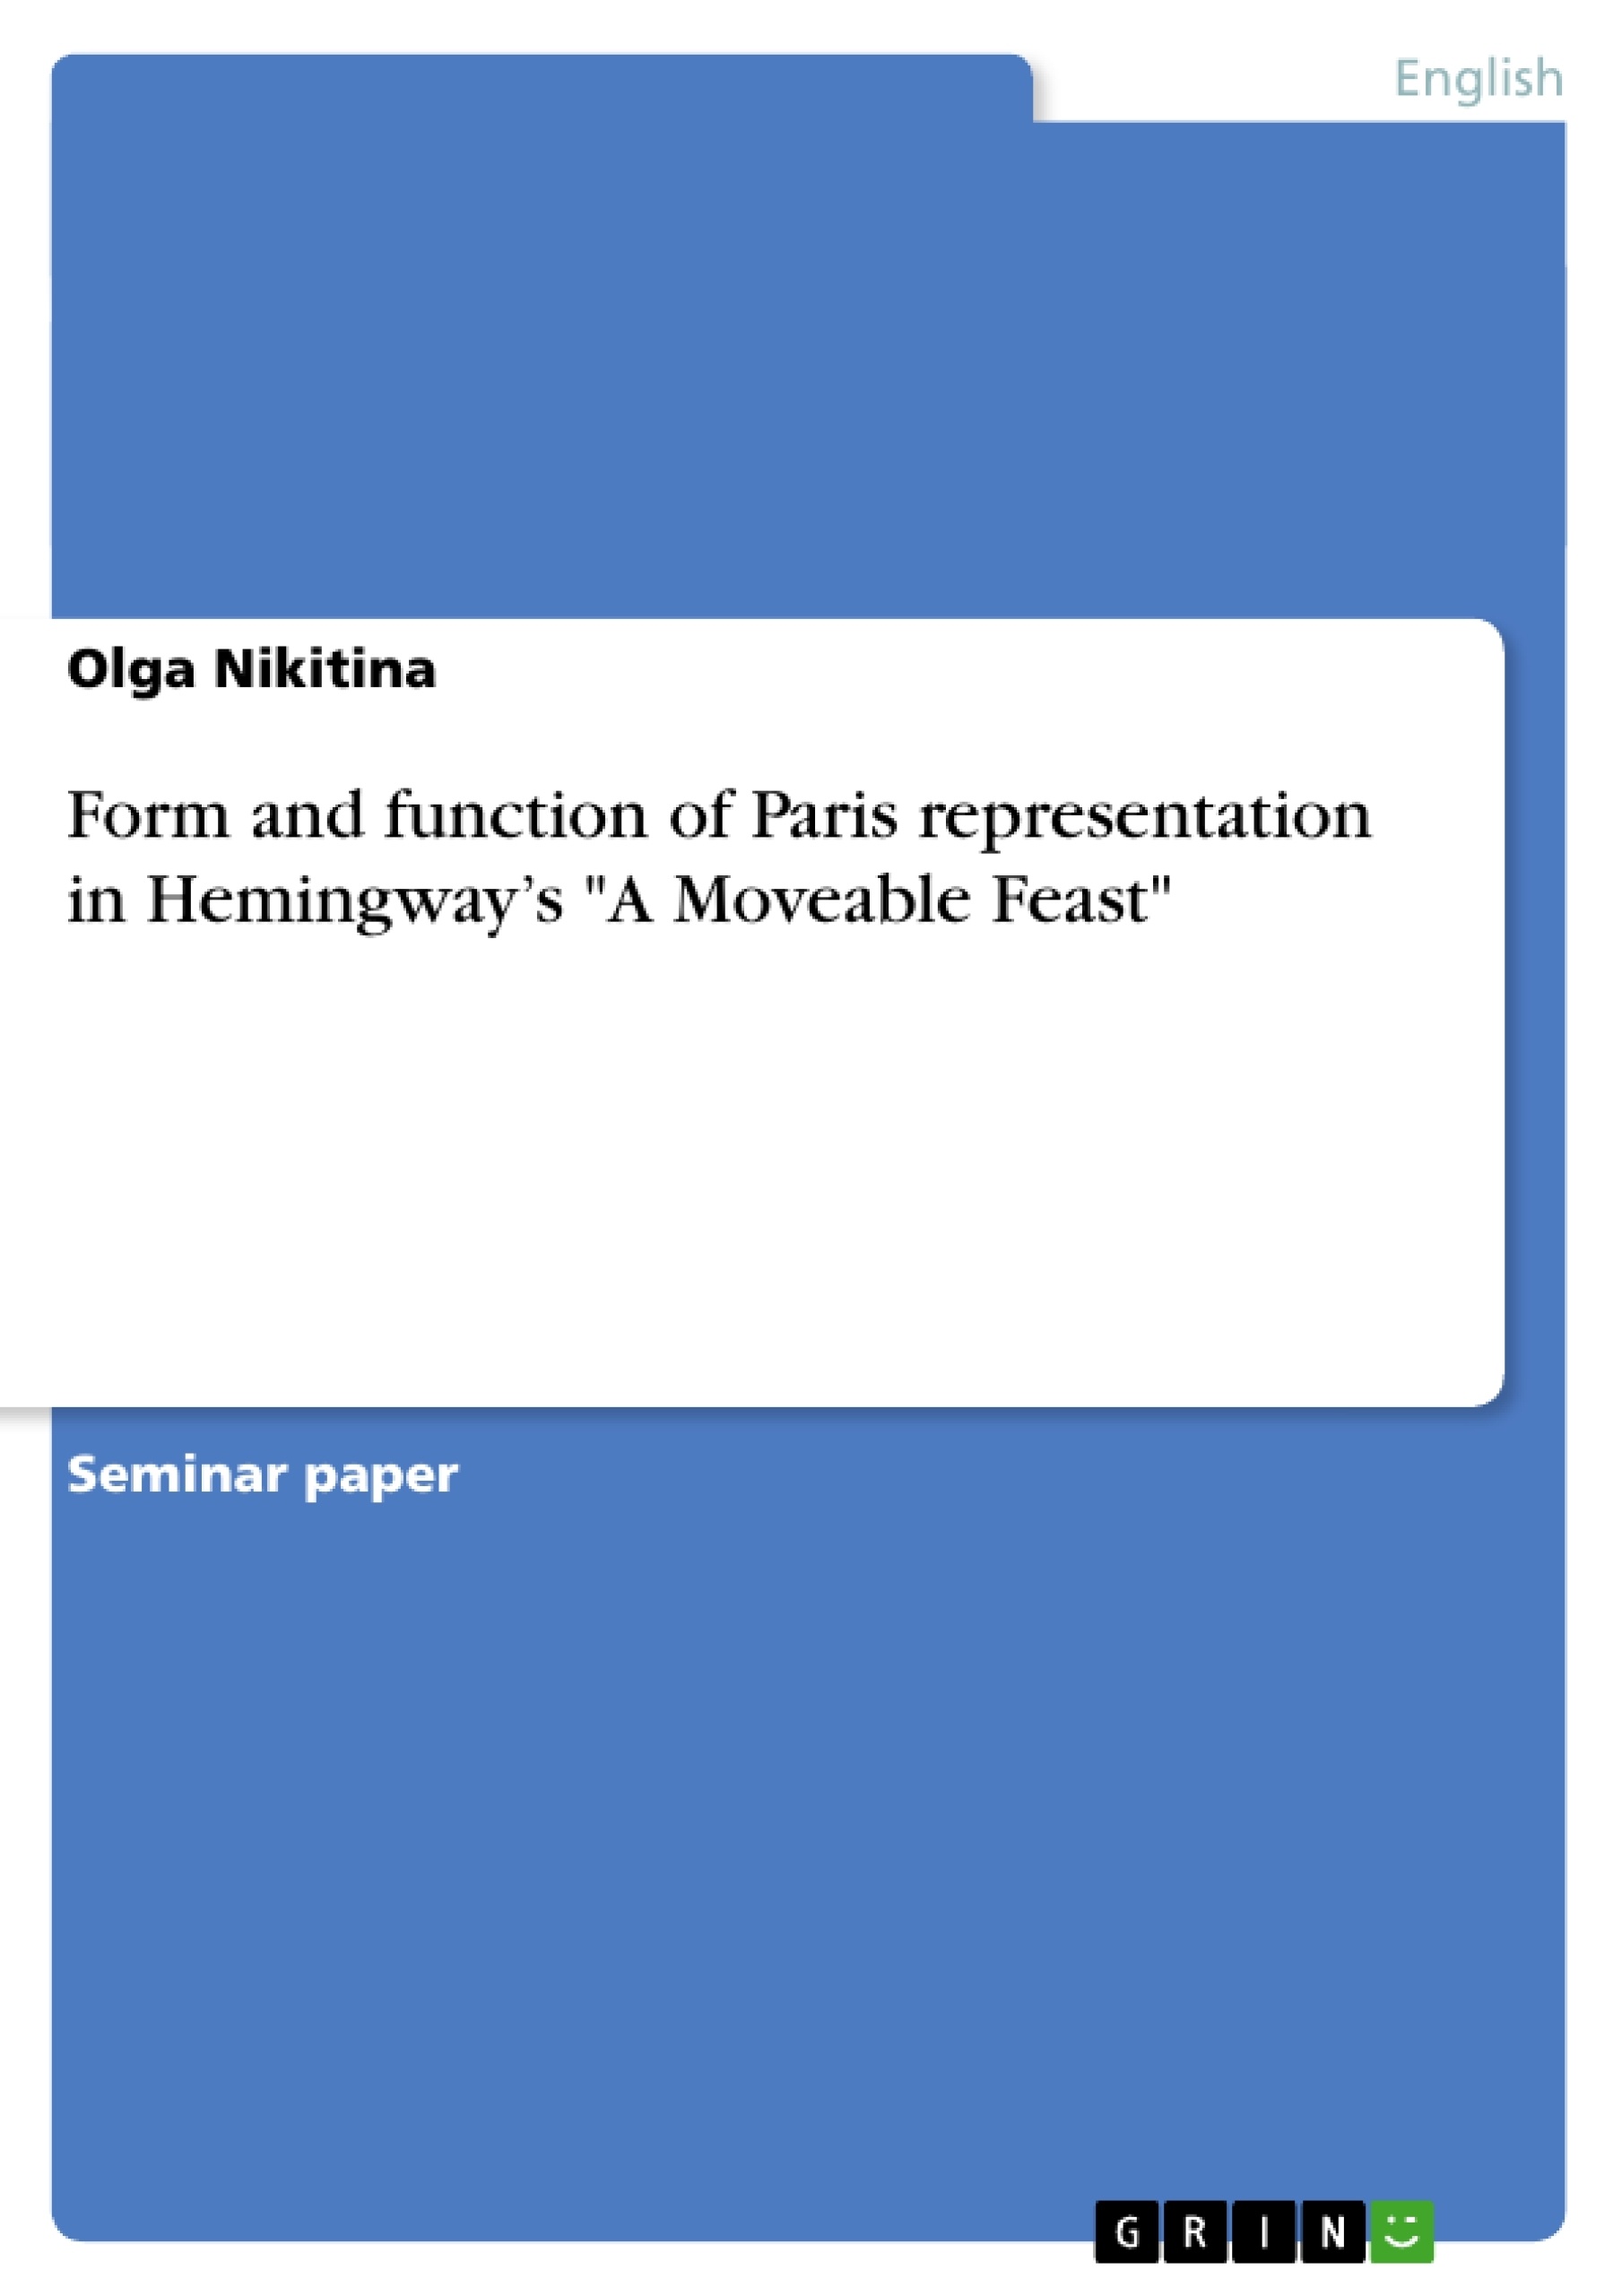 Título: Form and function of Paris representation  in Hemingway’s "A Moveable Feast"